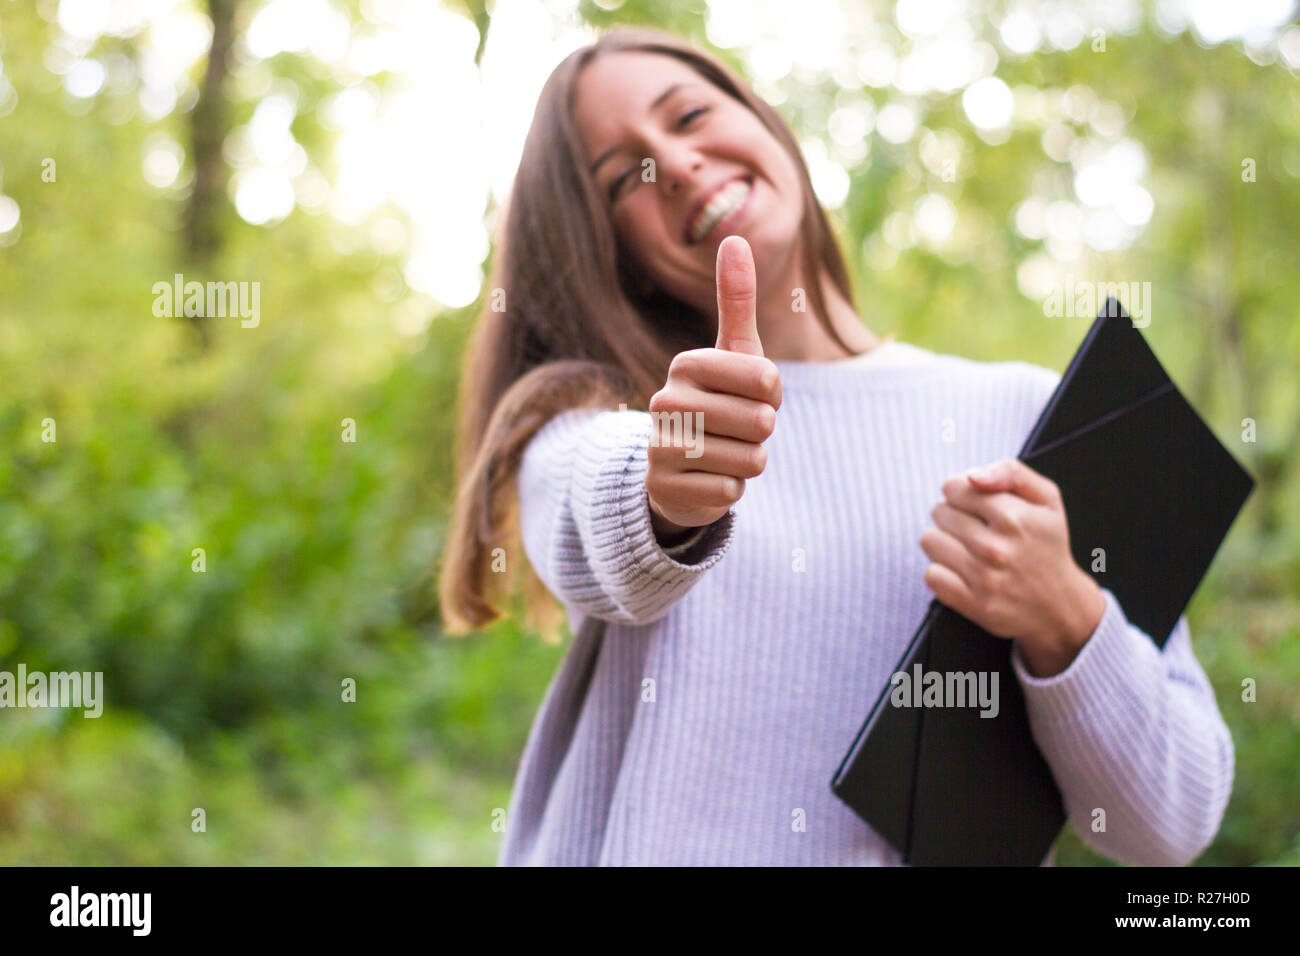 Female or young Caucasian european college girl or student with folder in college after doing final exam and refresher classes with thumps up smile an Stock Photo